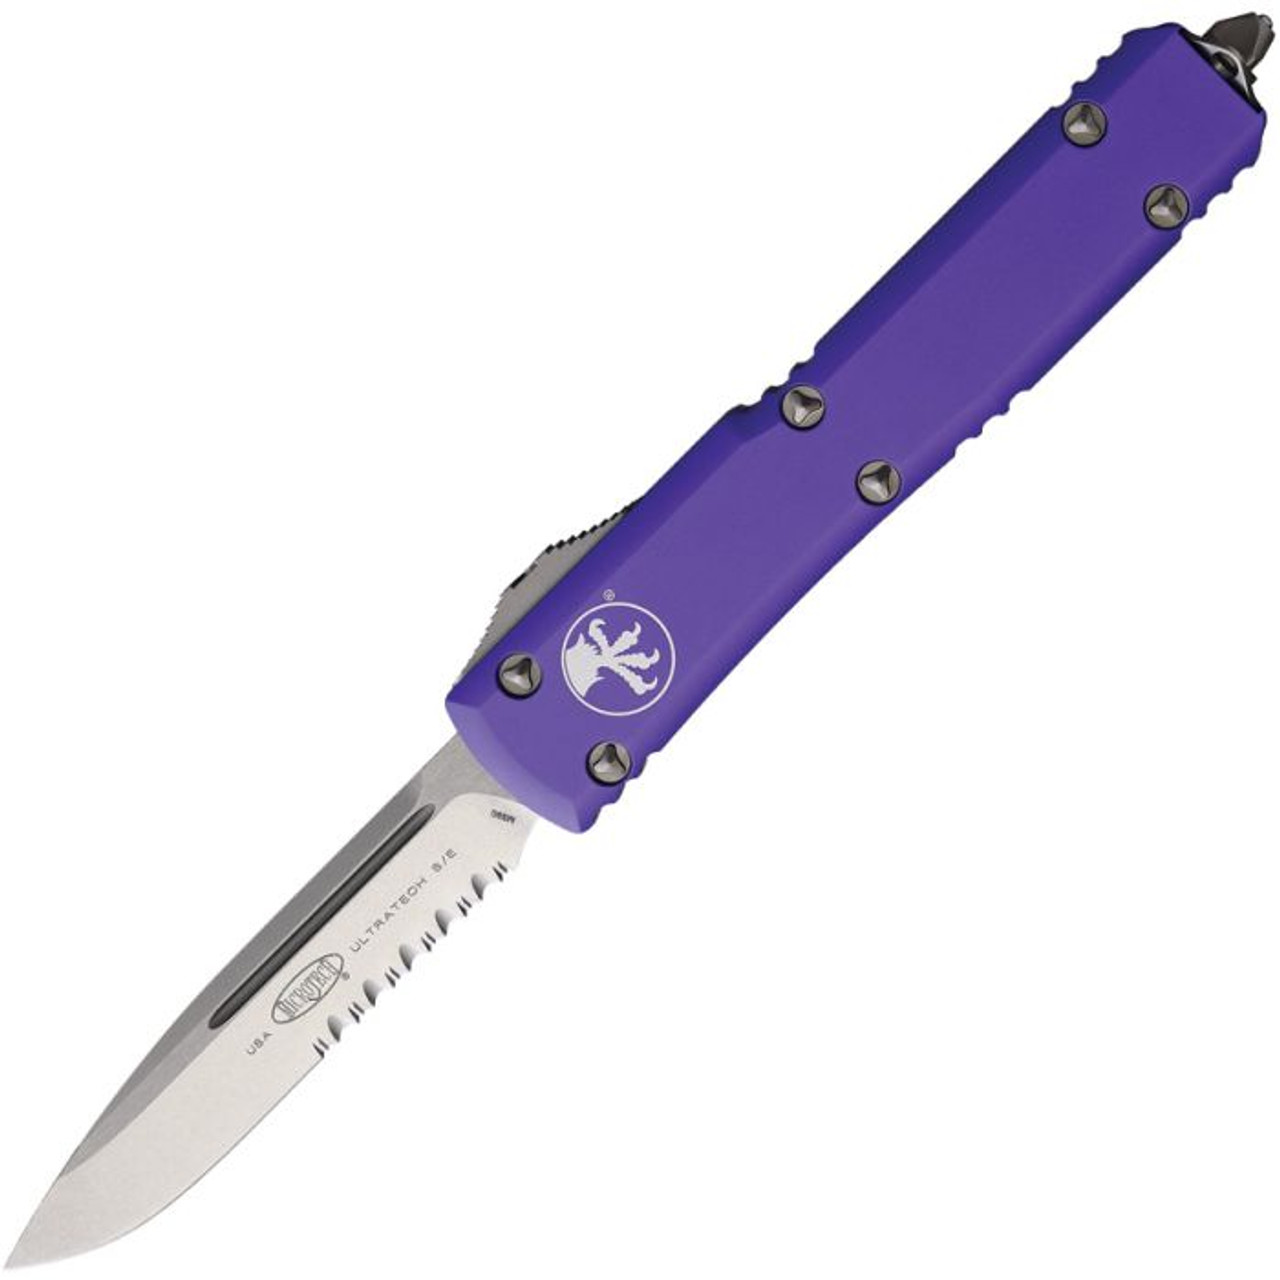 Microtech Ultratech S/E (MCT12111PU) 3.5" Bohler M390 Stonewashed Drop Point Partially Serrated Blade, Purple Anodized Aluminum Handle